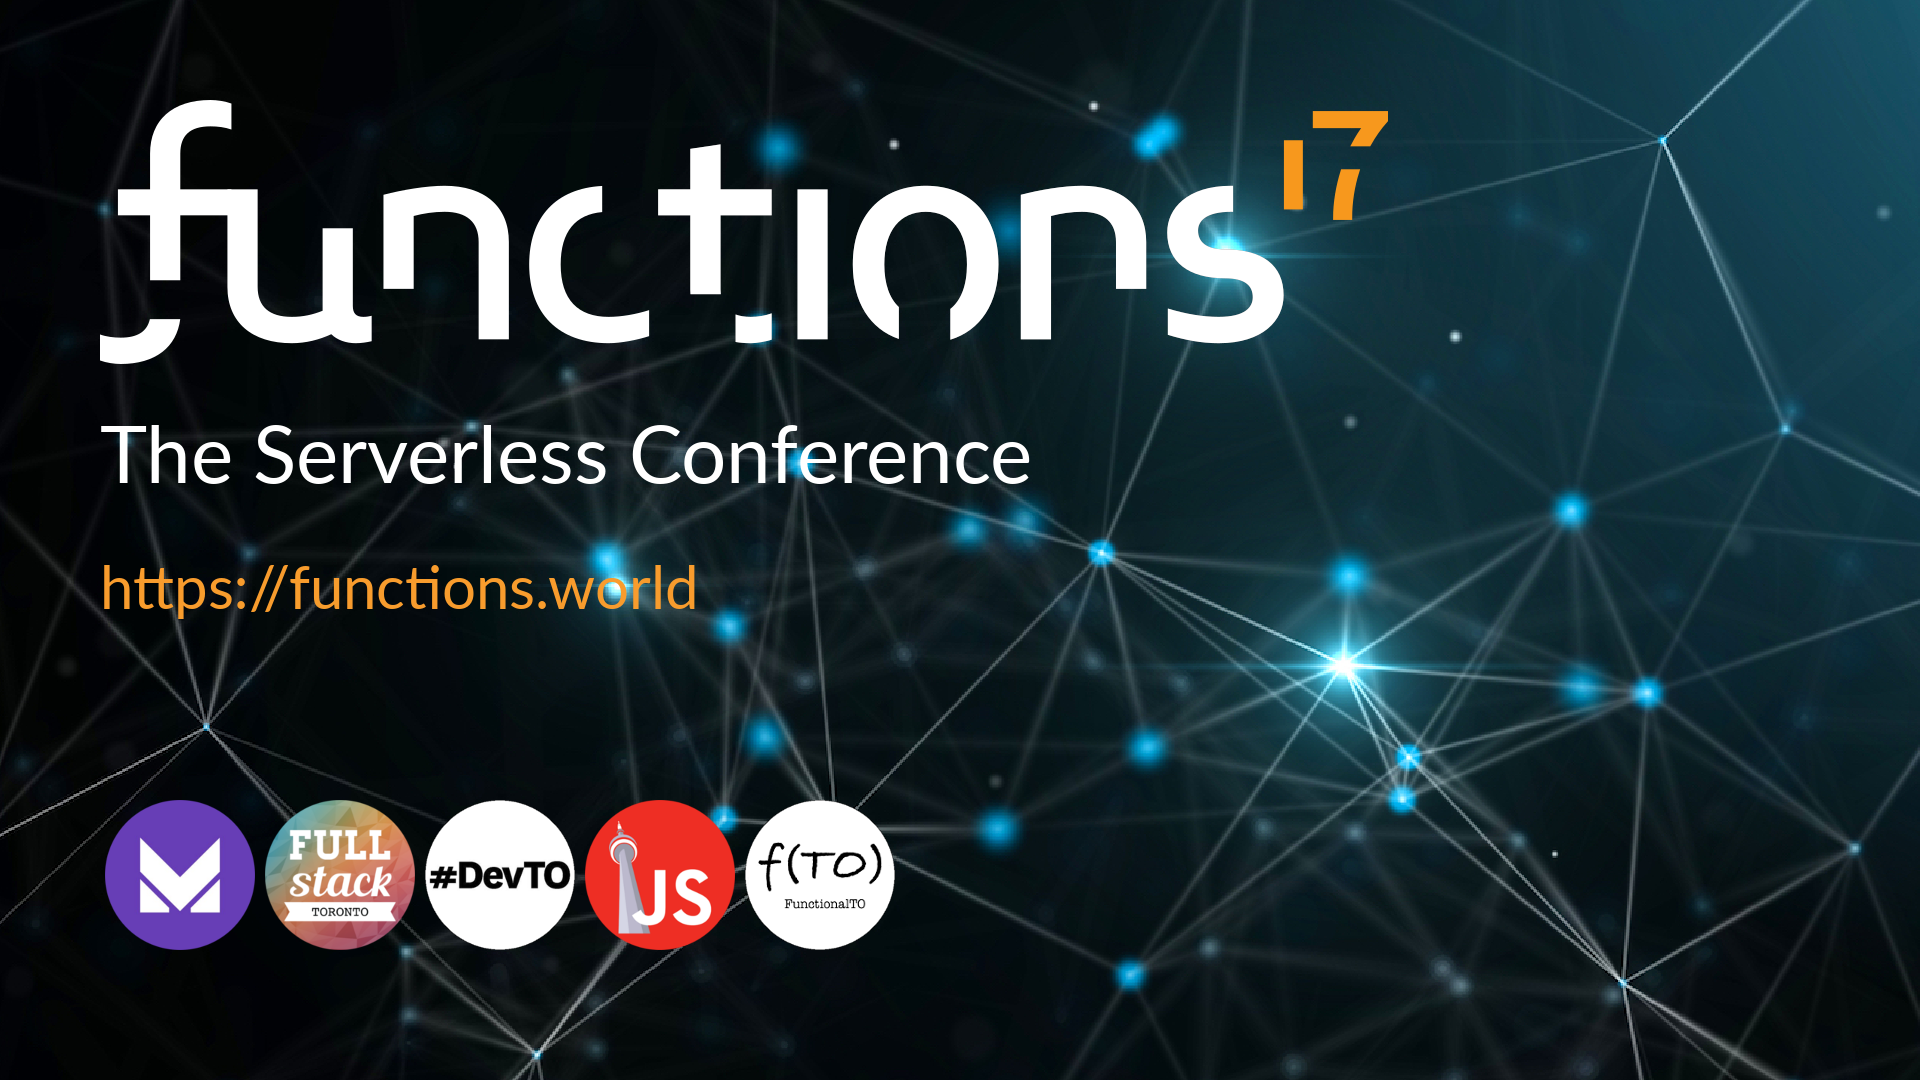 Functions17 event